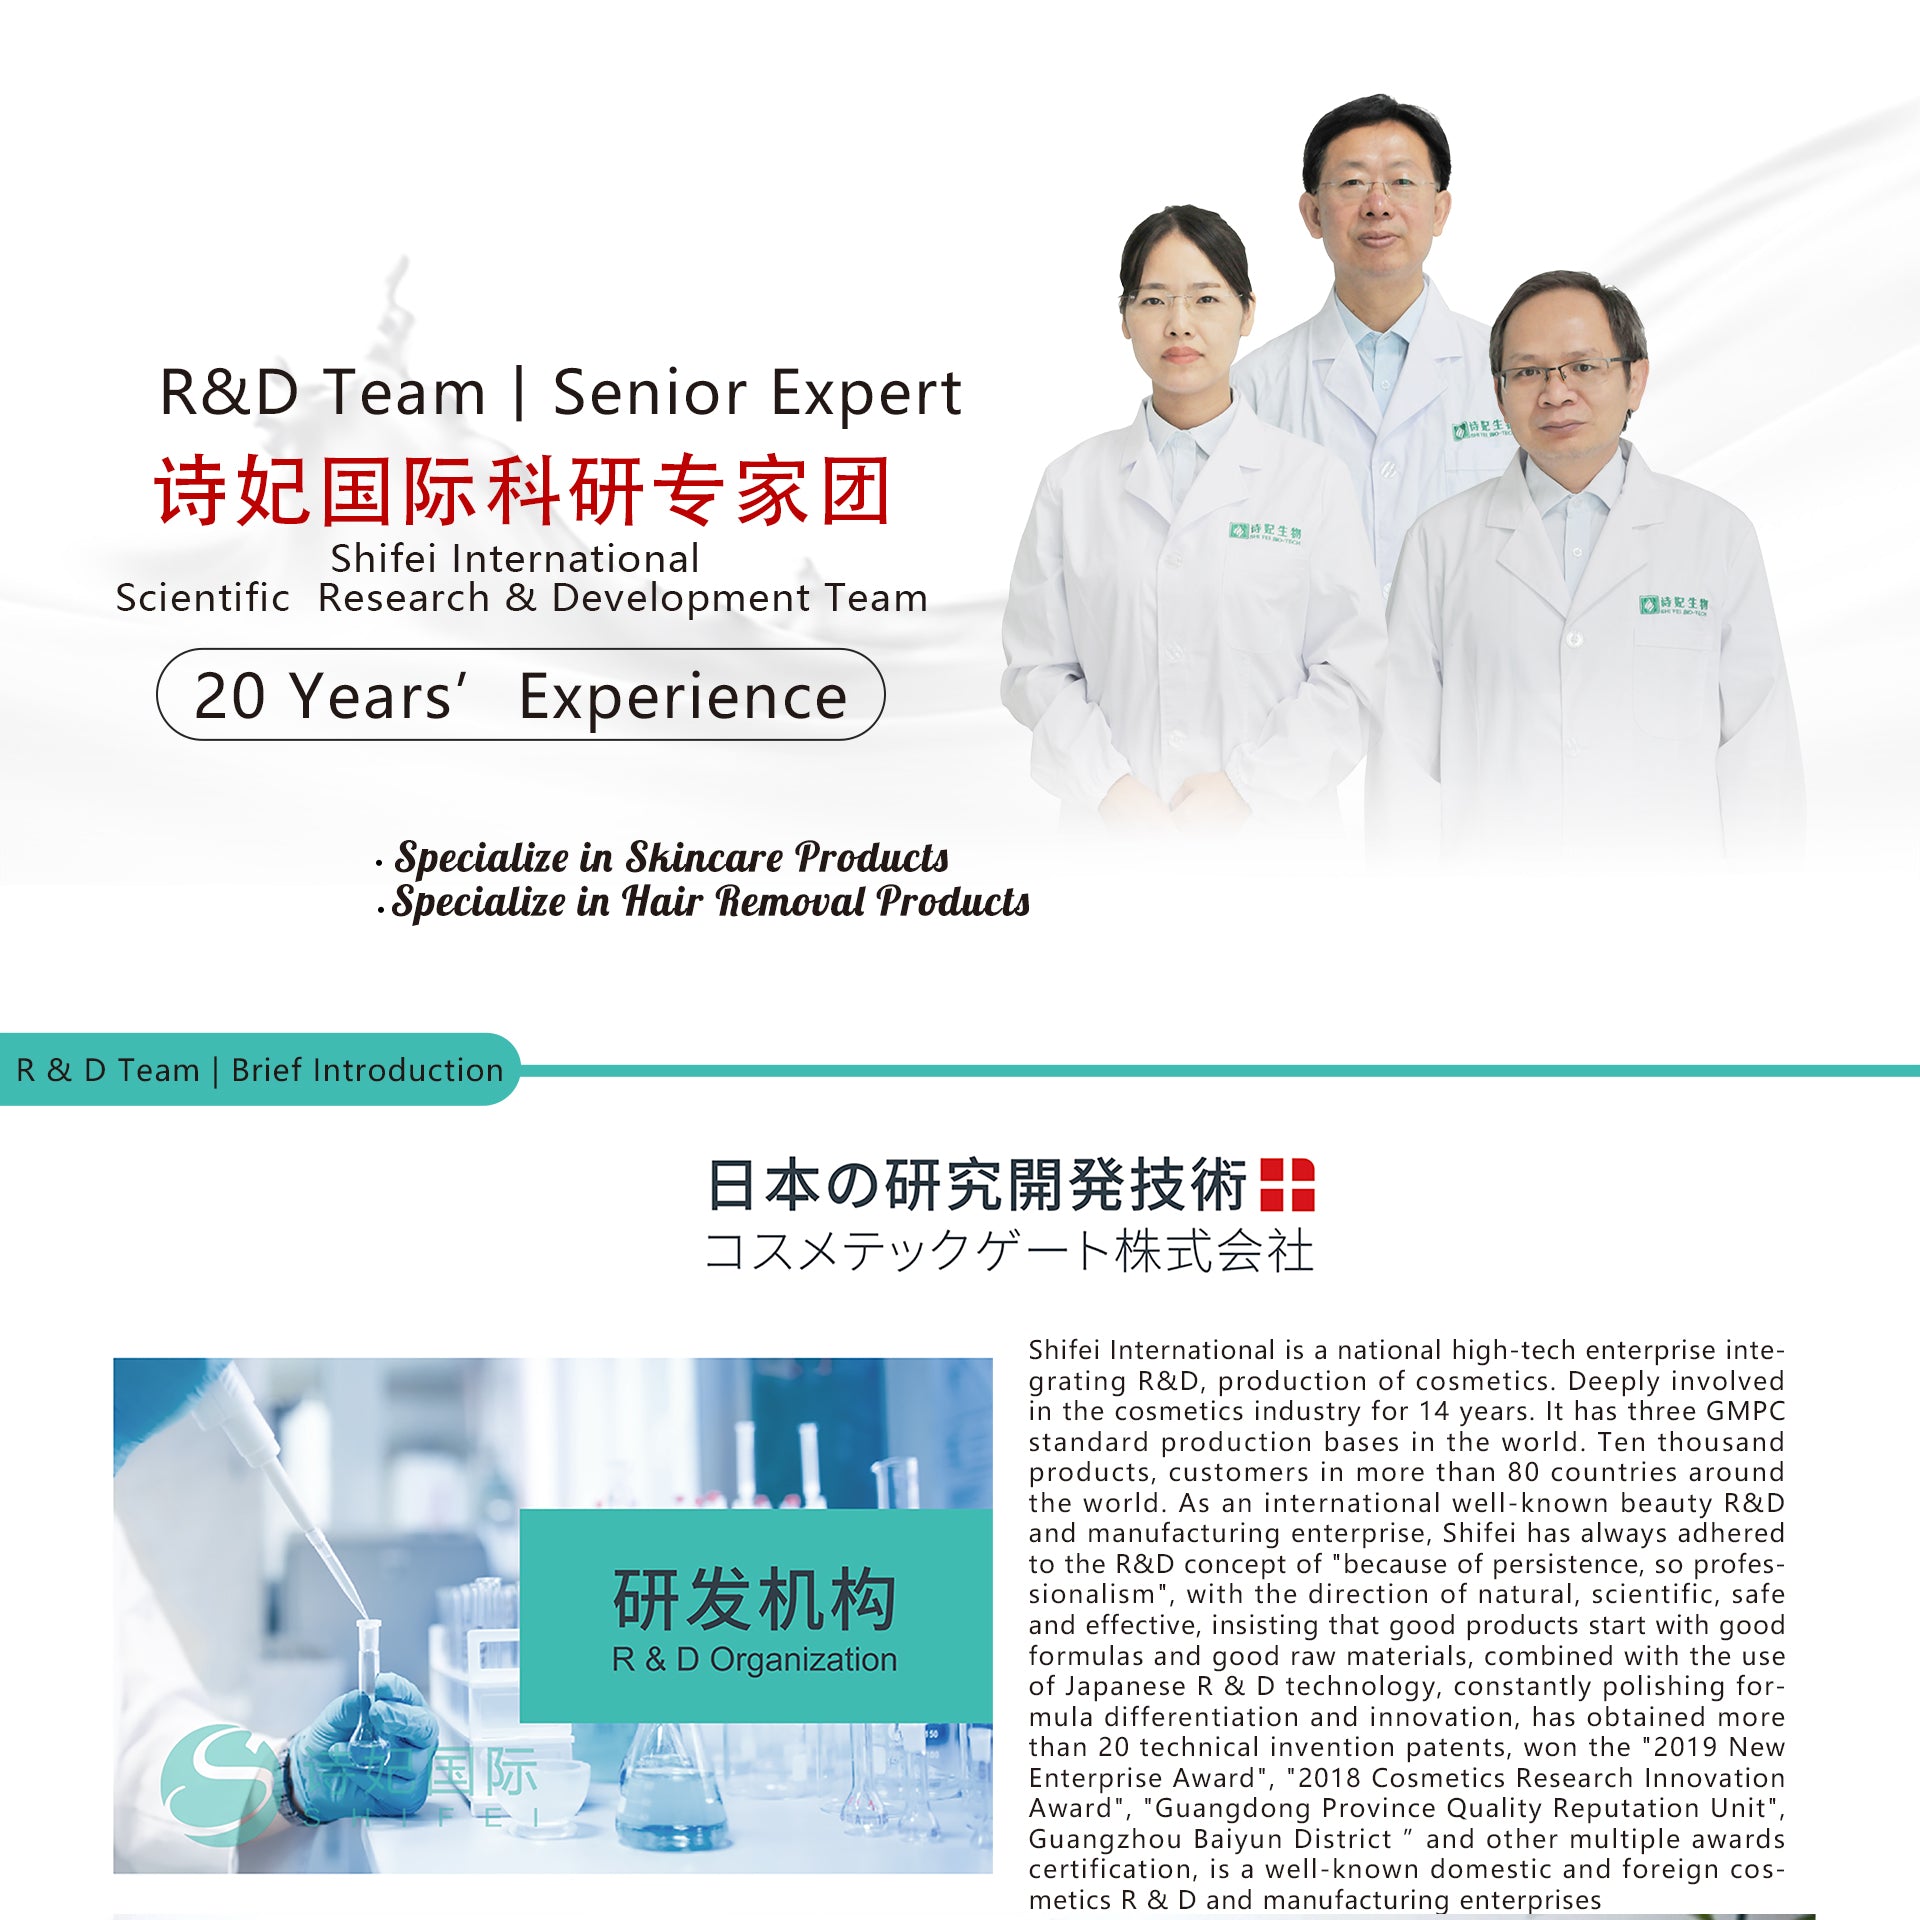 R & D Strength with 20 years experienced engineer